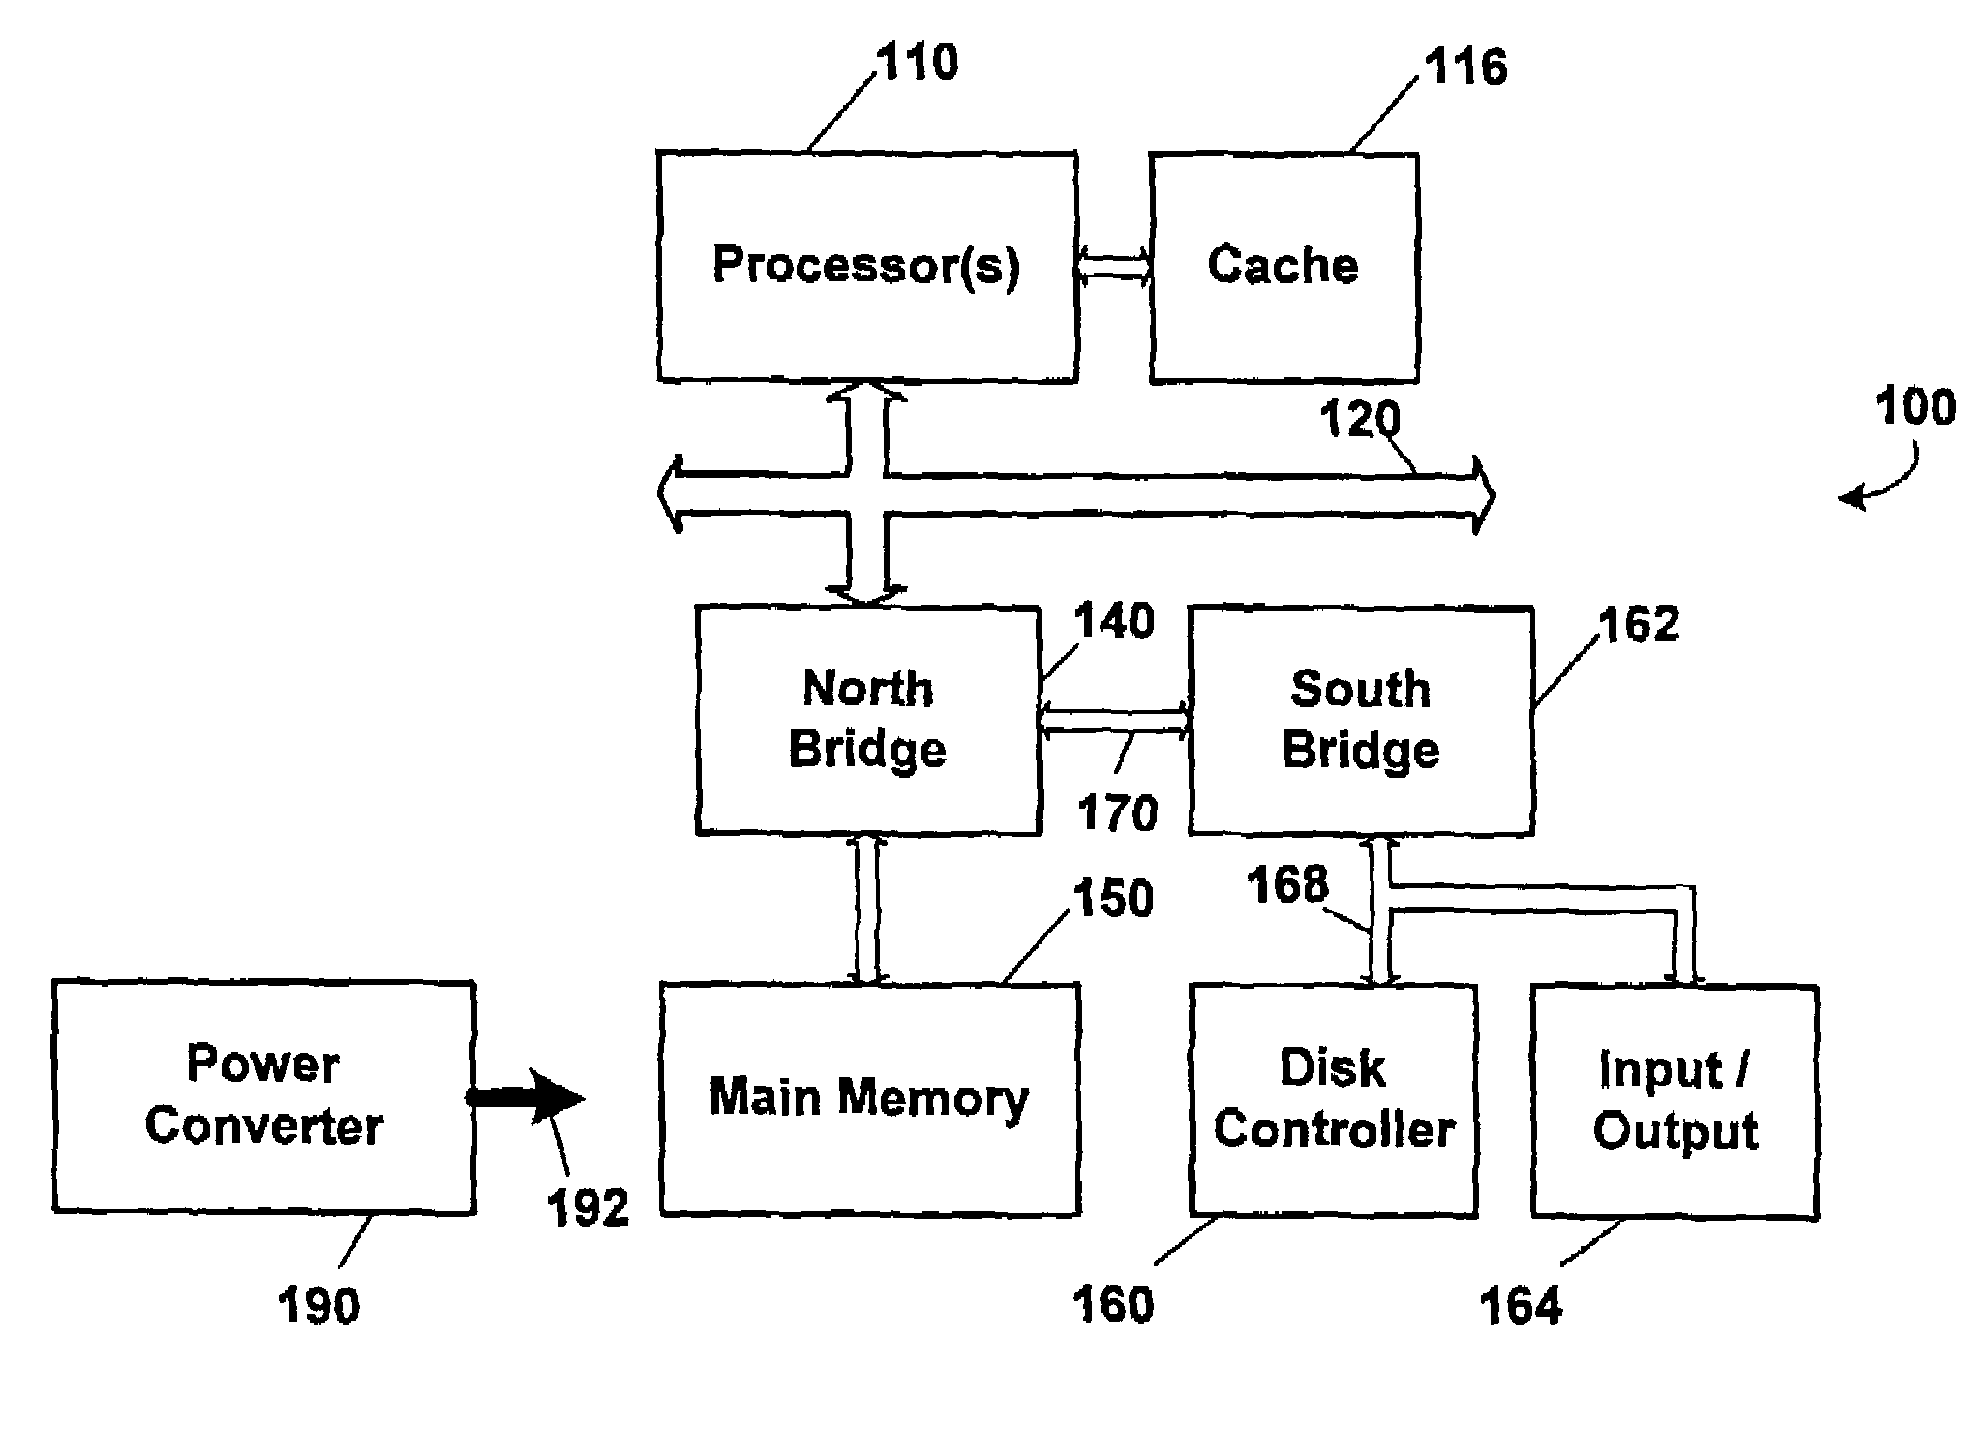 Method of saving energy in an information handling system by controlling a main converter based on the amount of power drawn by the system